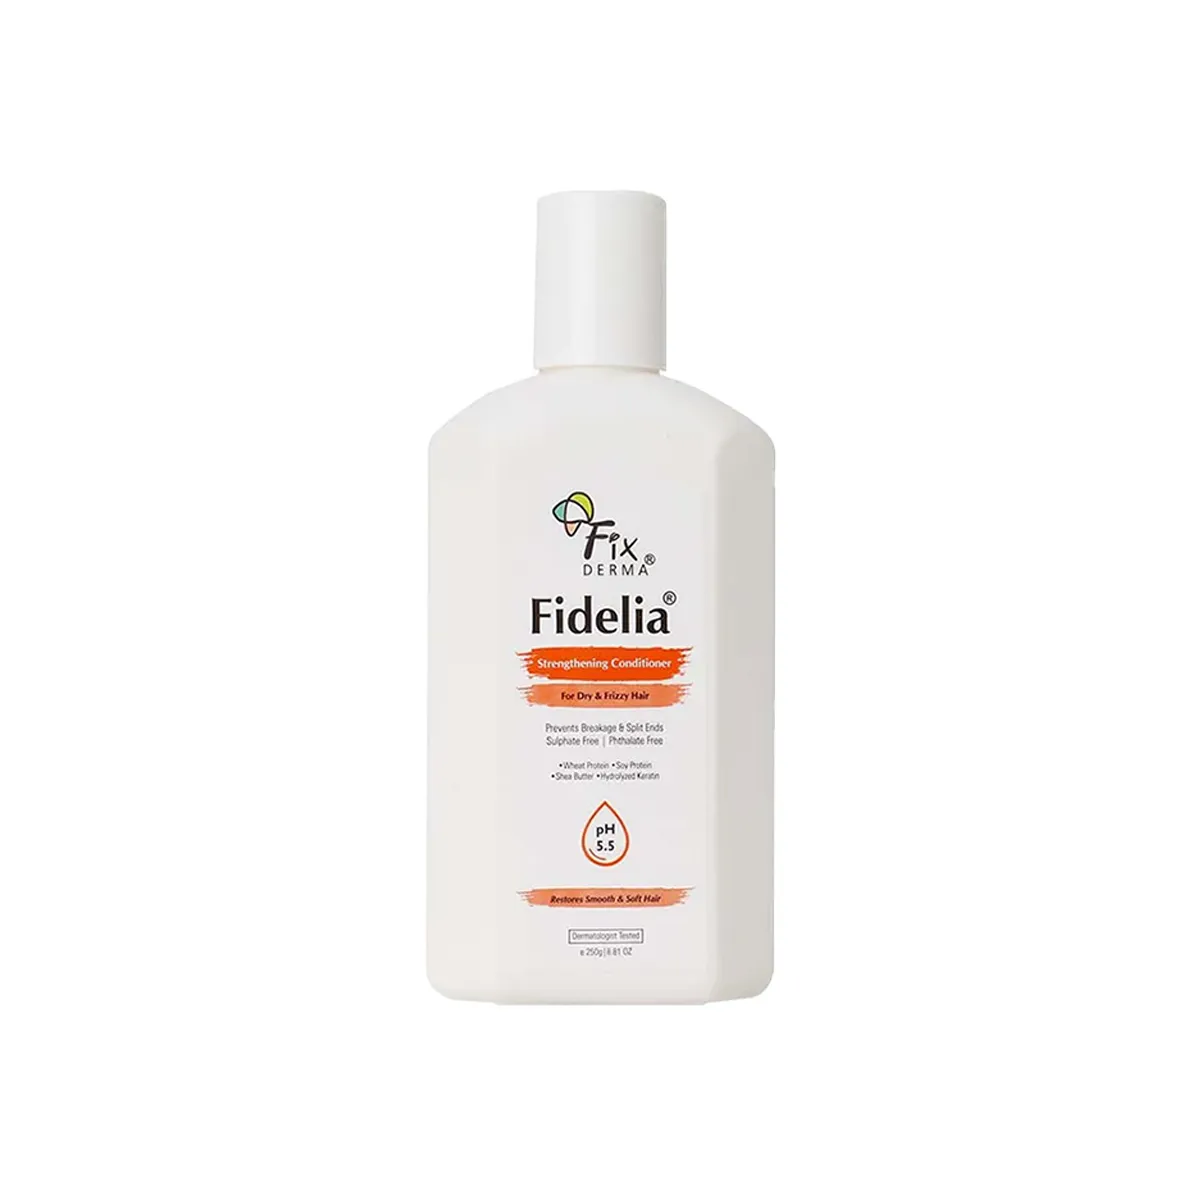 First product image of Fixderma Fidelia Strengthening Conditioner 250g